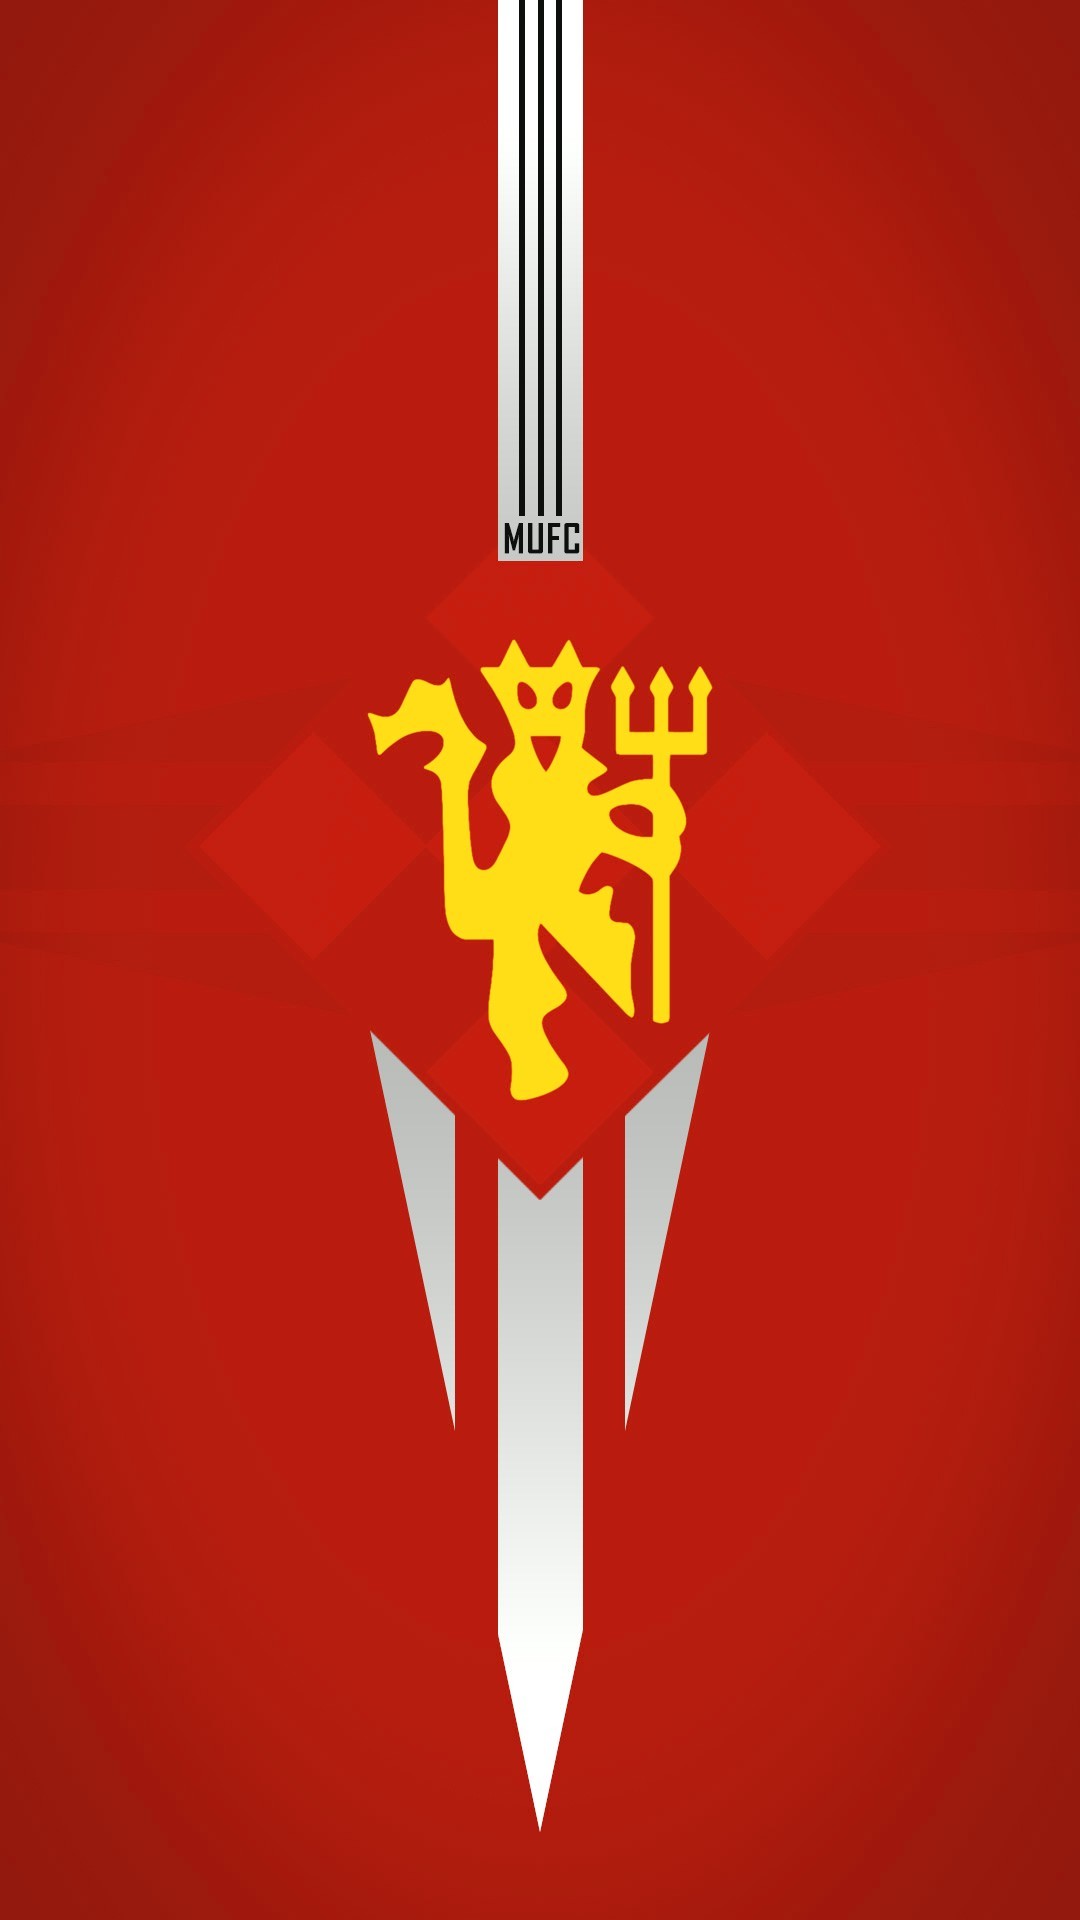 1080x1920 Manchester United Red Devils iPhone Wallpaper